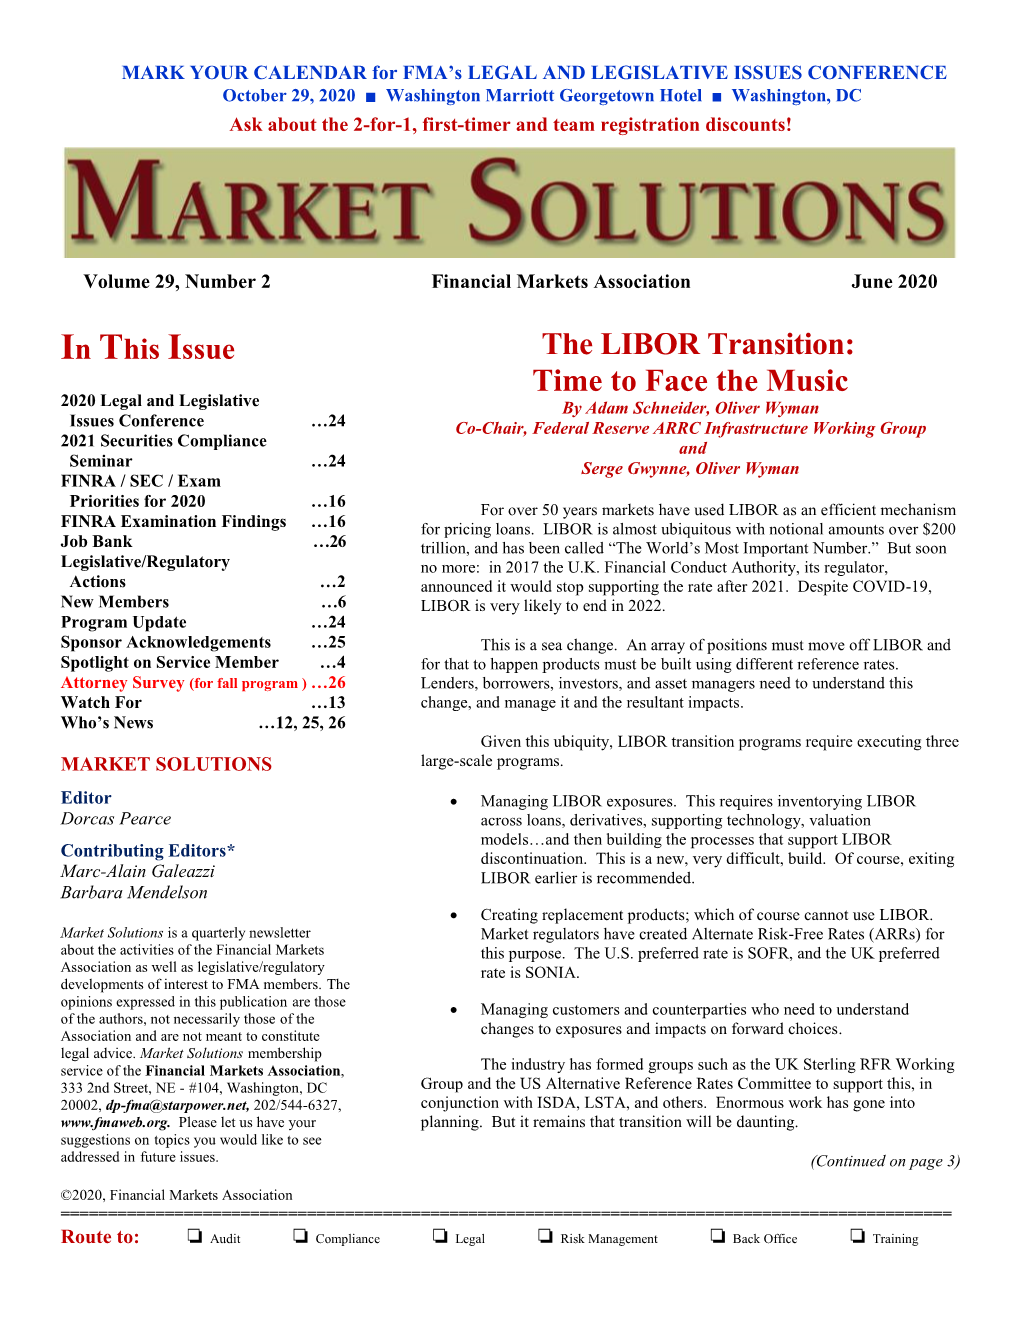 MARKET SOLUTIONS Large-Scale Programs